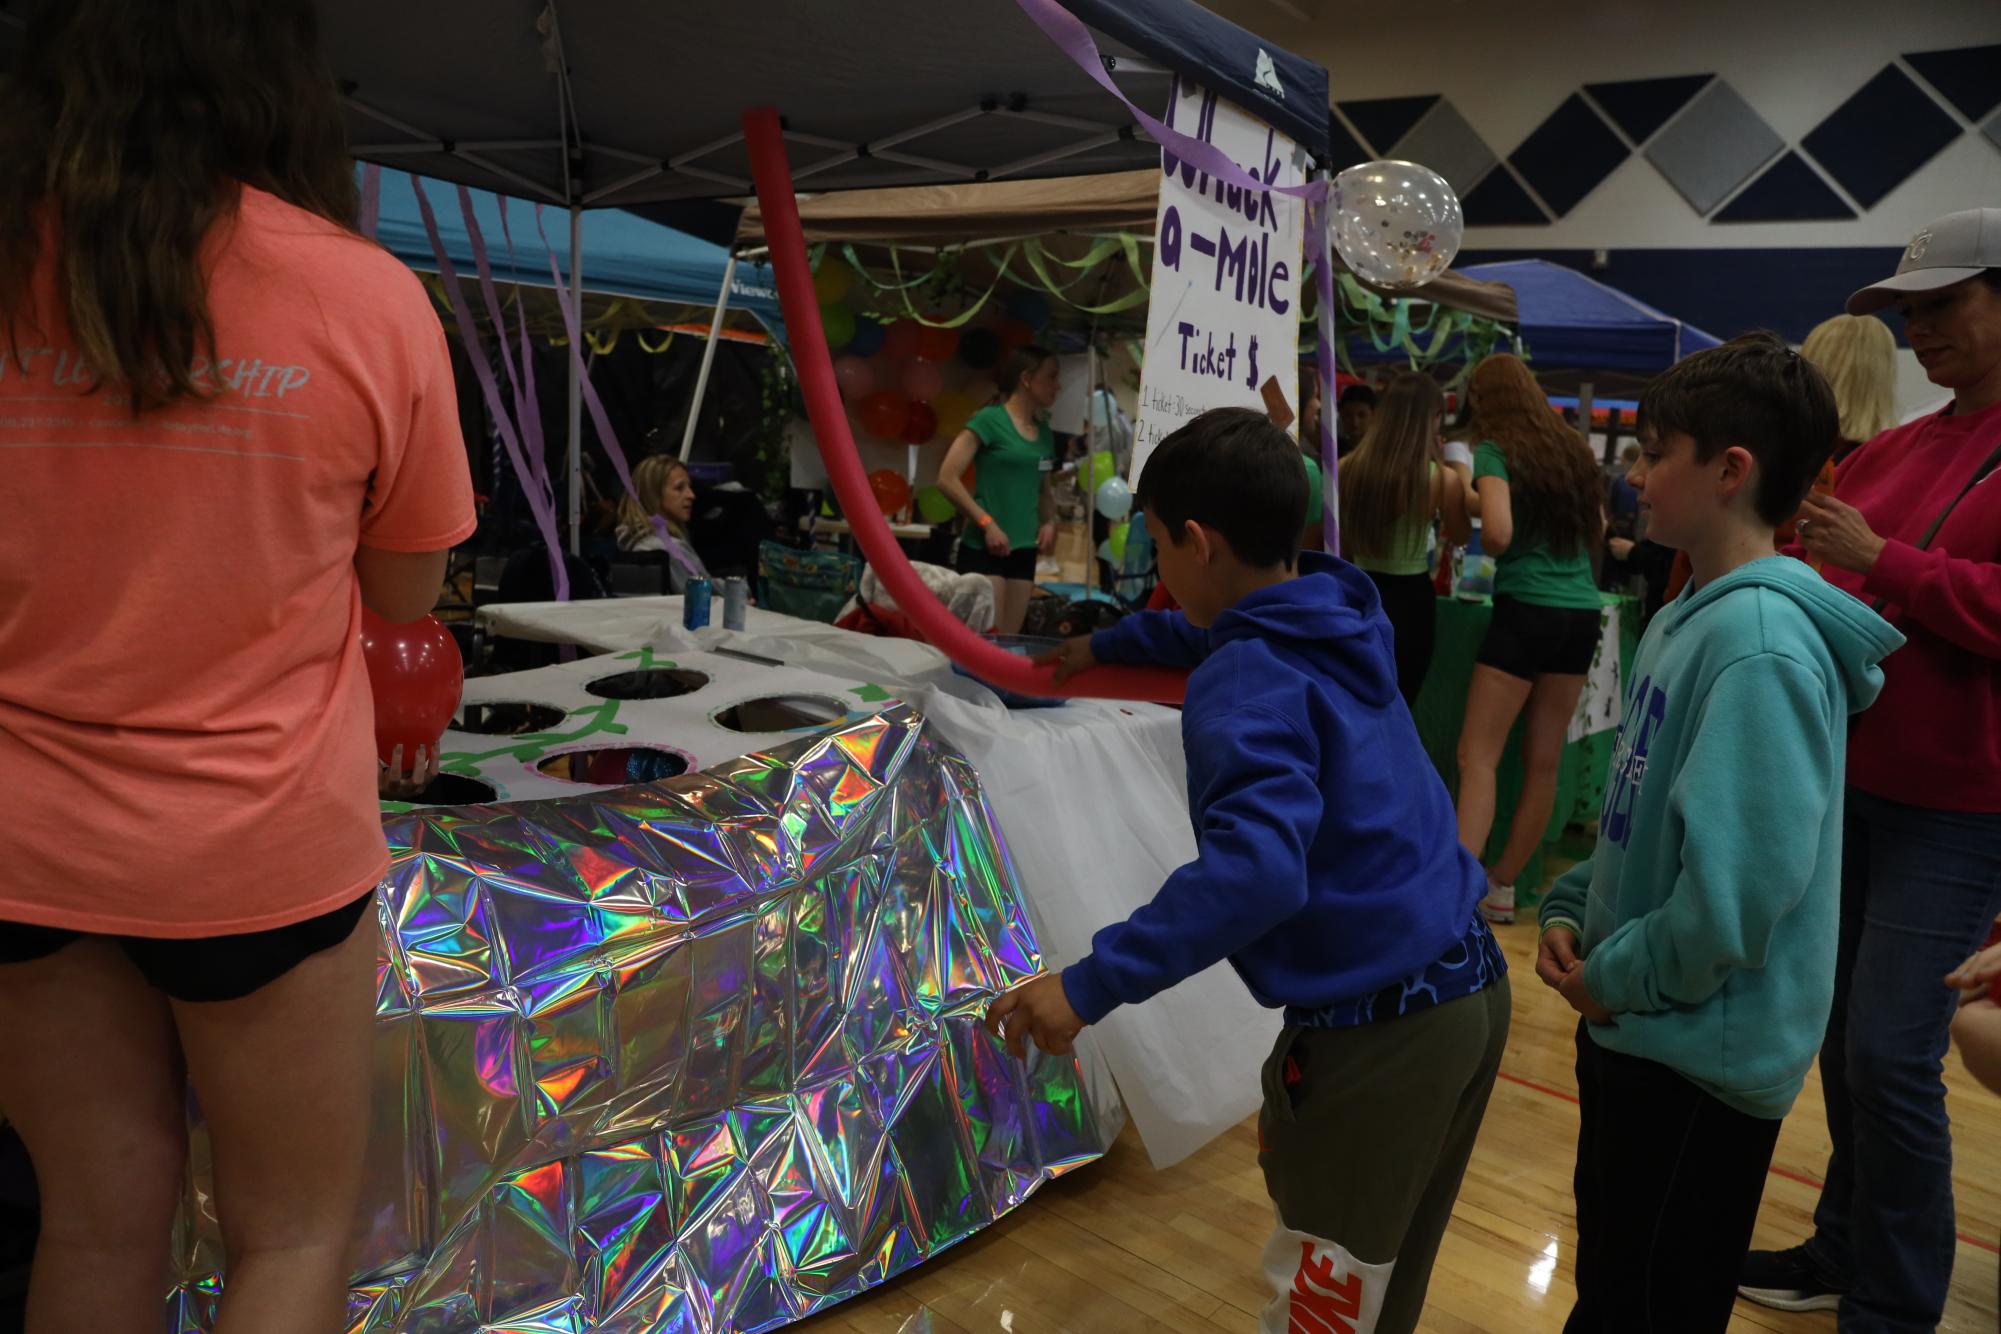 Pool noodle in hand, one of the Relay for Life guests plays student-made “Whack a Mole.”